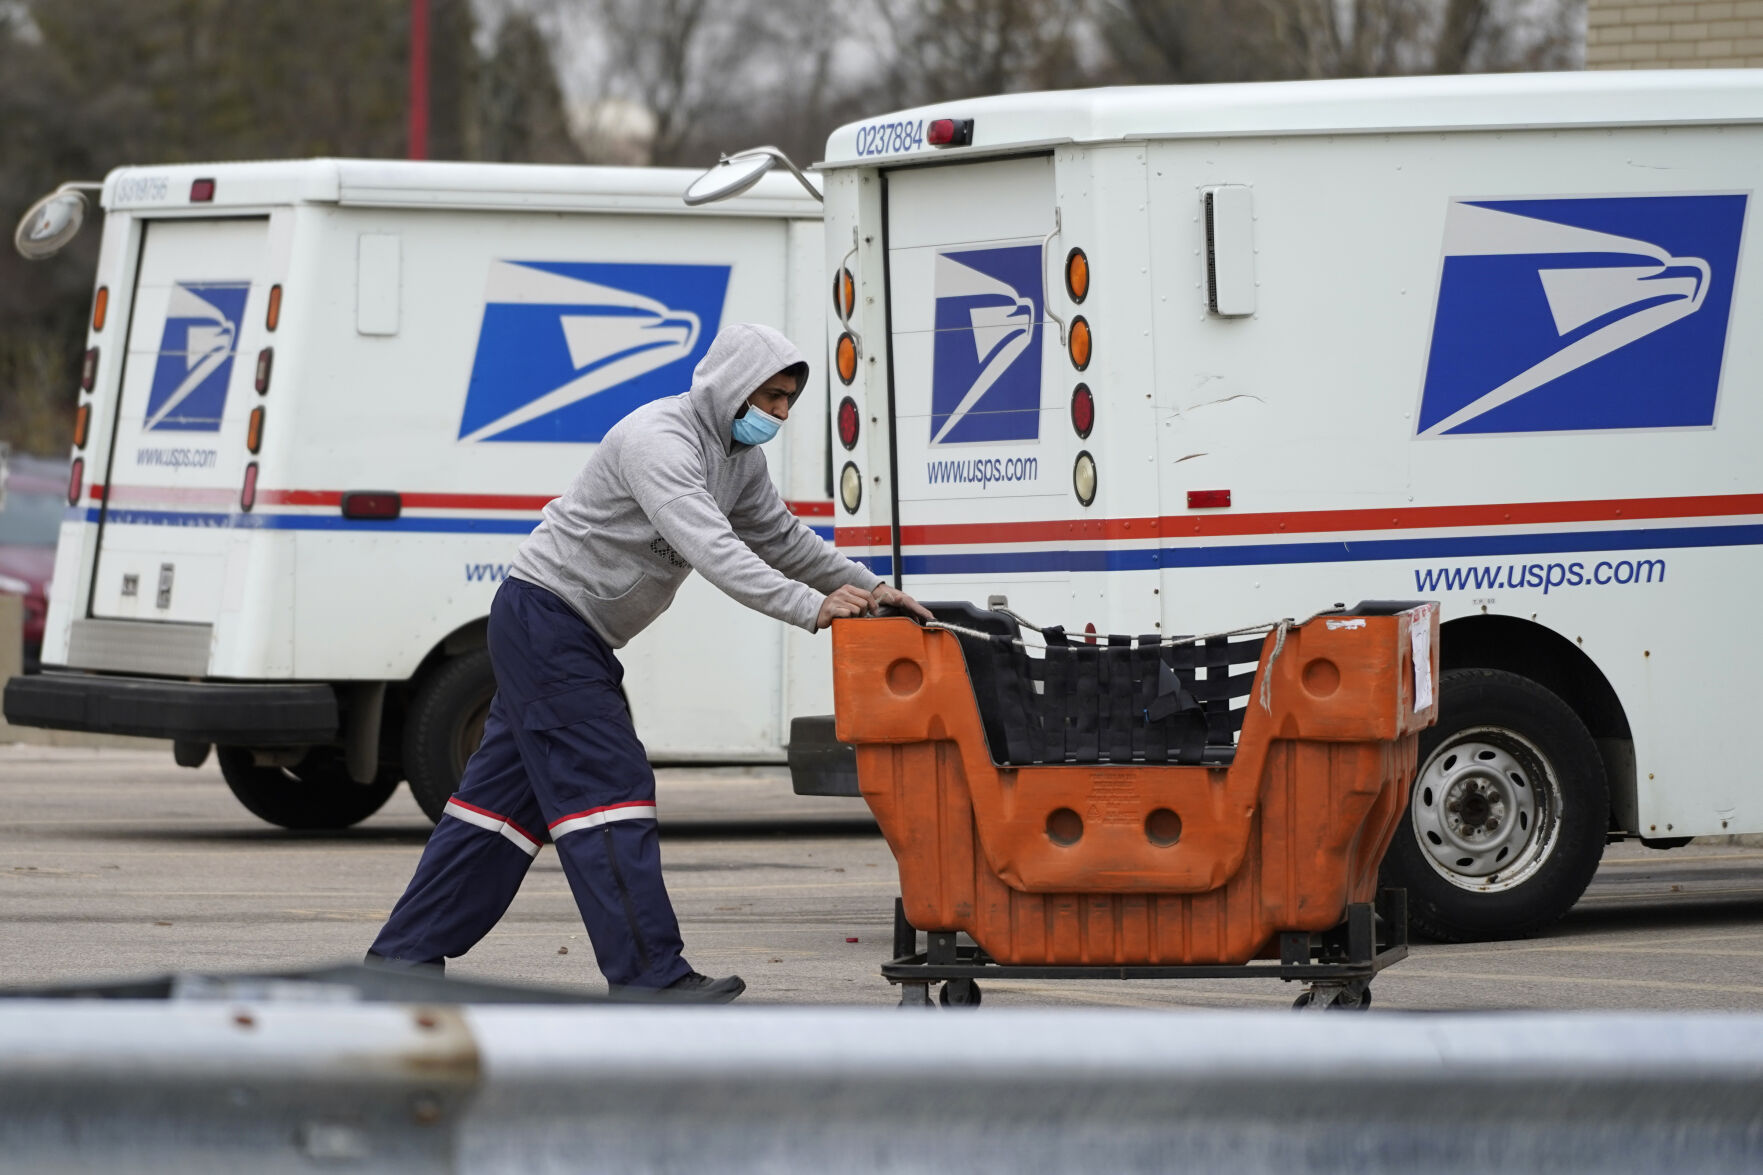 <p>FILE - A United States Postal Service employee works outside a post office in Wheeling, Ill., Dec. 3, 2021. Carriers like the U.S. Postal Service, FedEx and United Parcel Service have capacity to meet projected demand this holiday season, which is cheery news for shippers and shoppers alike. (AP Photo/Nam Y. Huh, File)</p>   PHOTO CREDIT: Nam Y. Huh - staff, ASSOCIATED PRESS